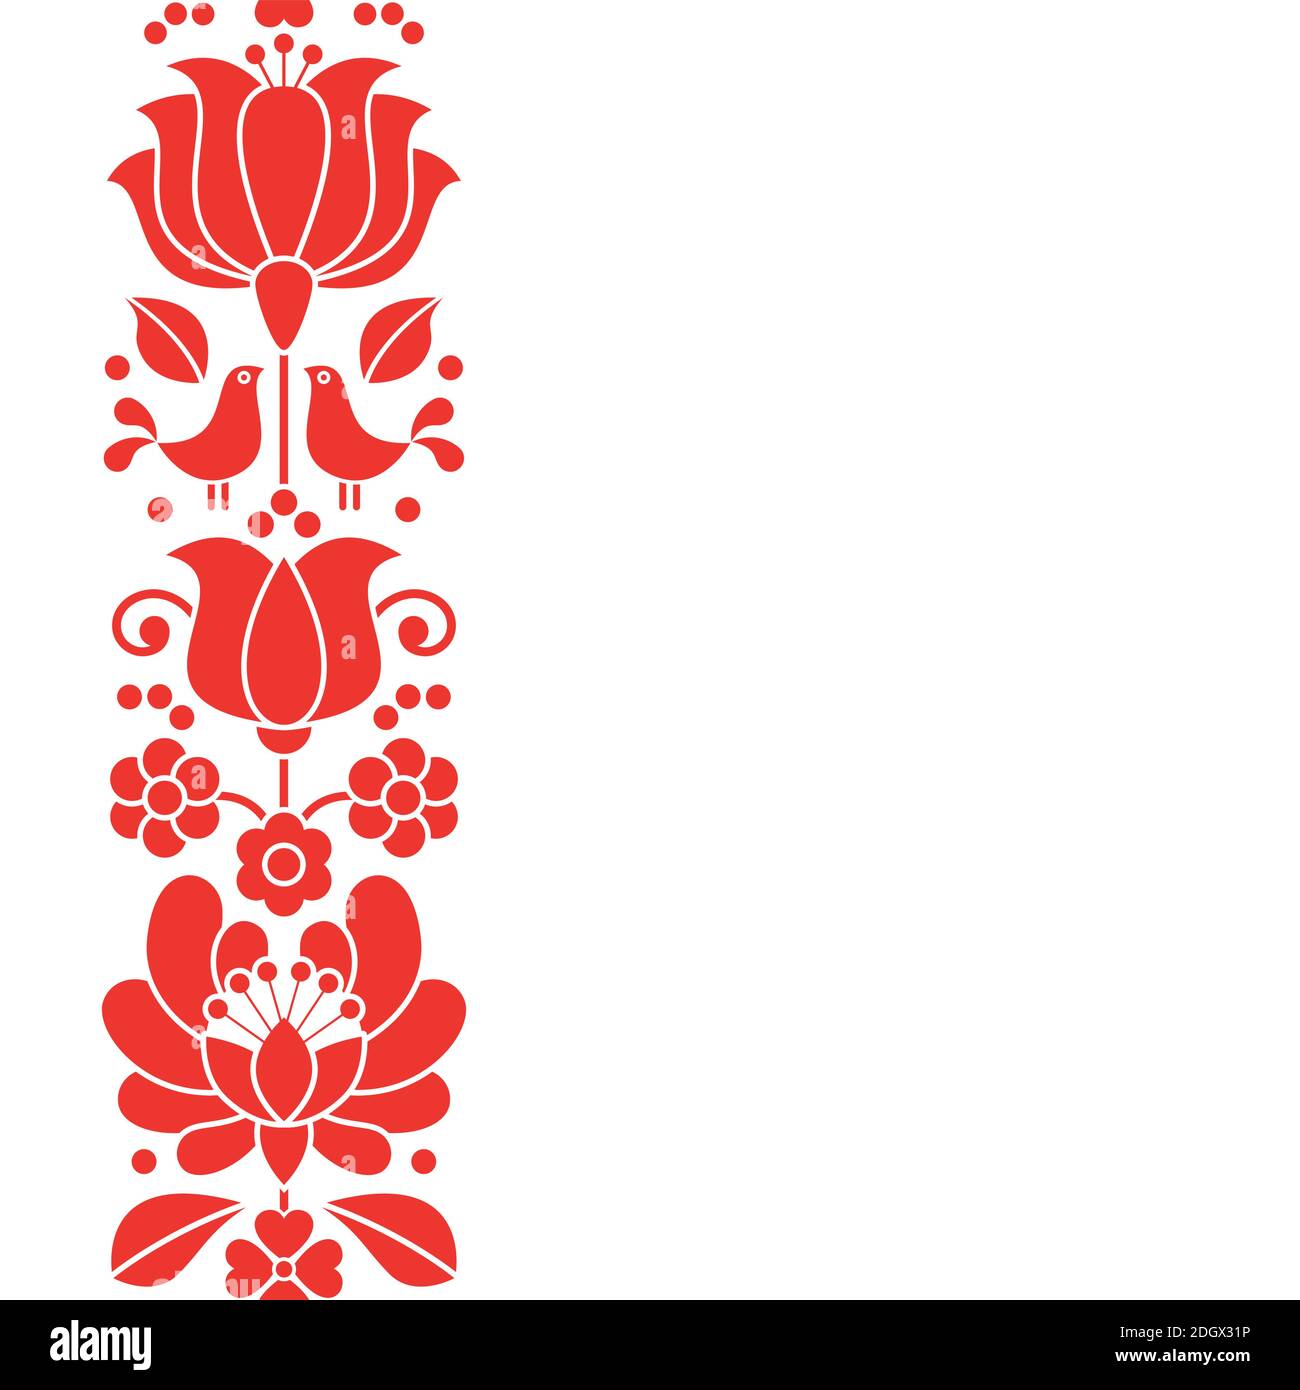 Hungarian folk art vector greeting card or wedding invitation, red floral design inspired by traditional embroidery Stock Vector